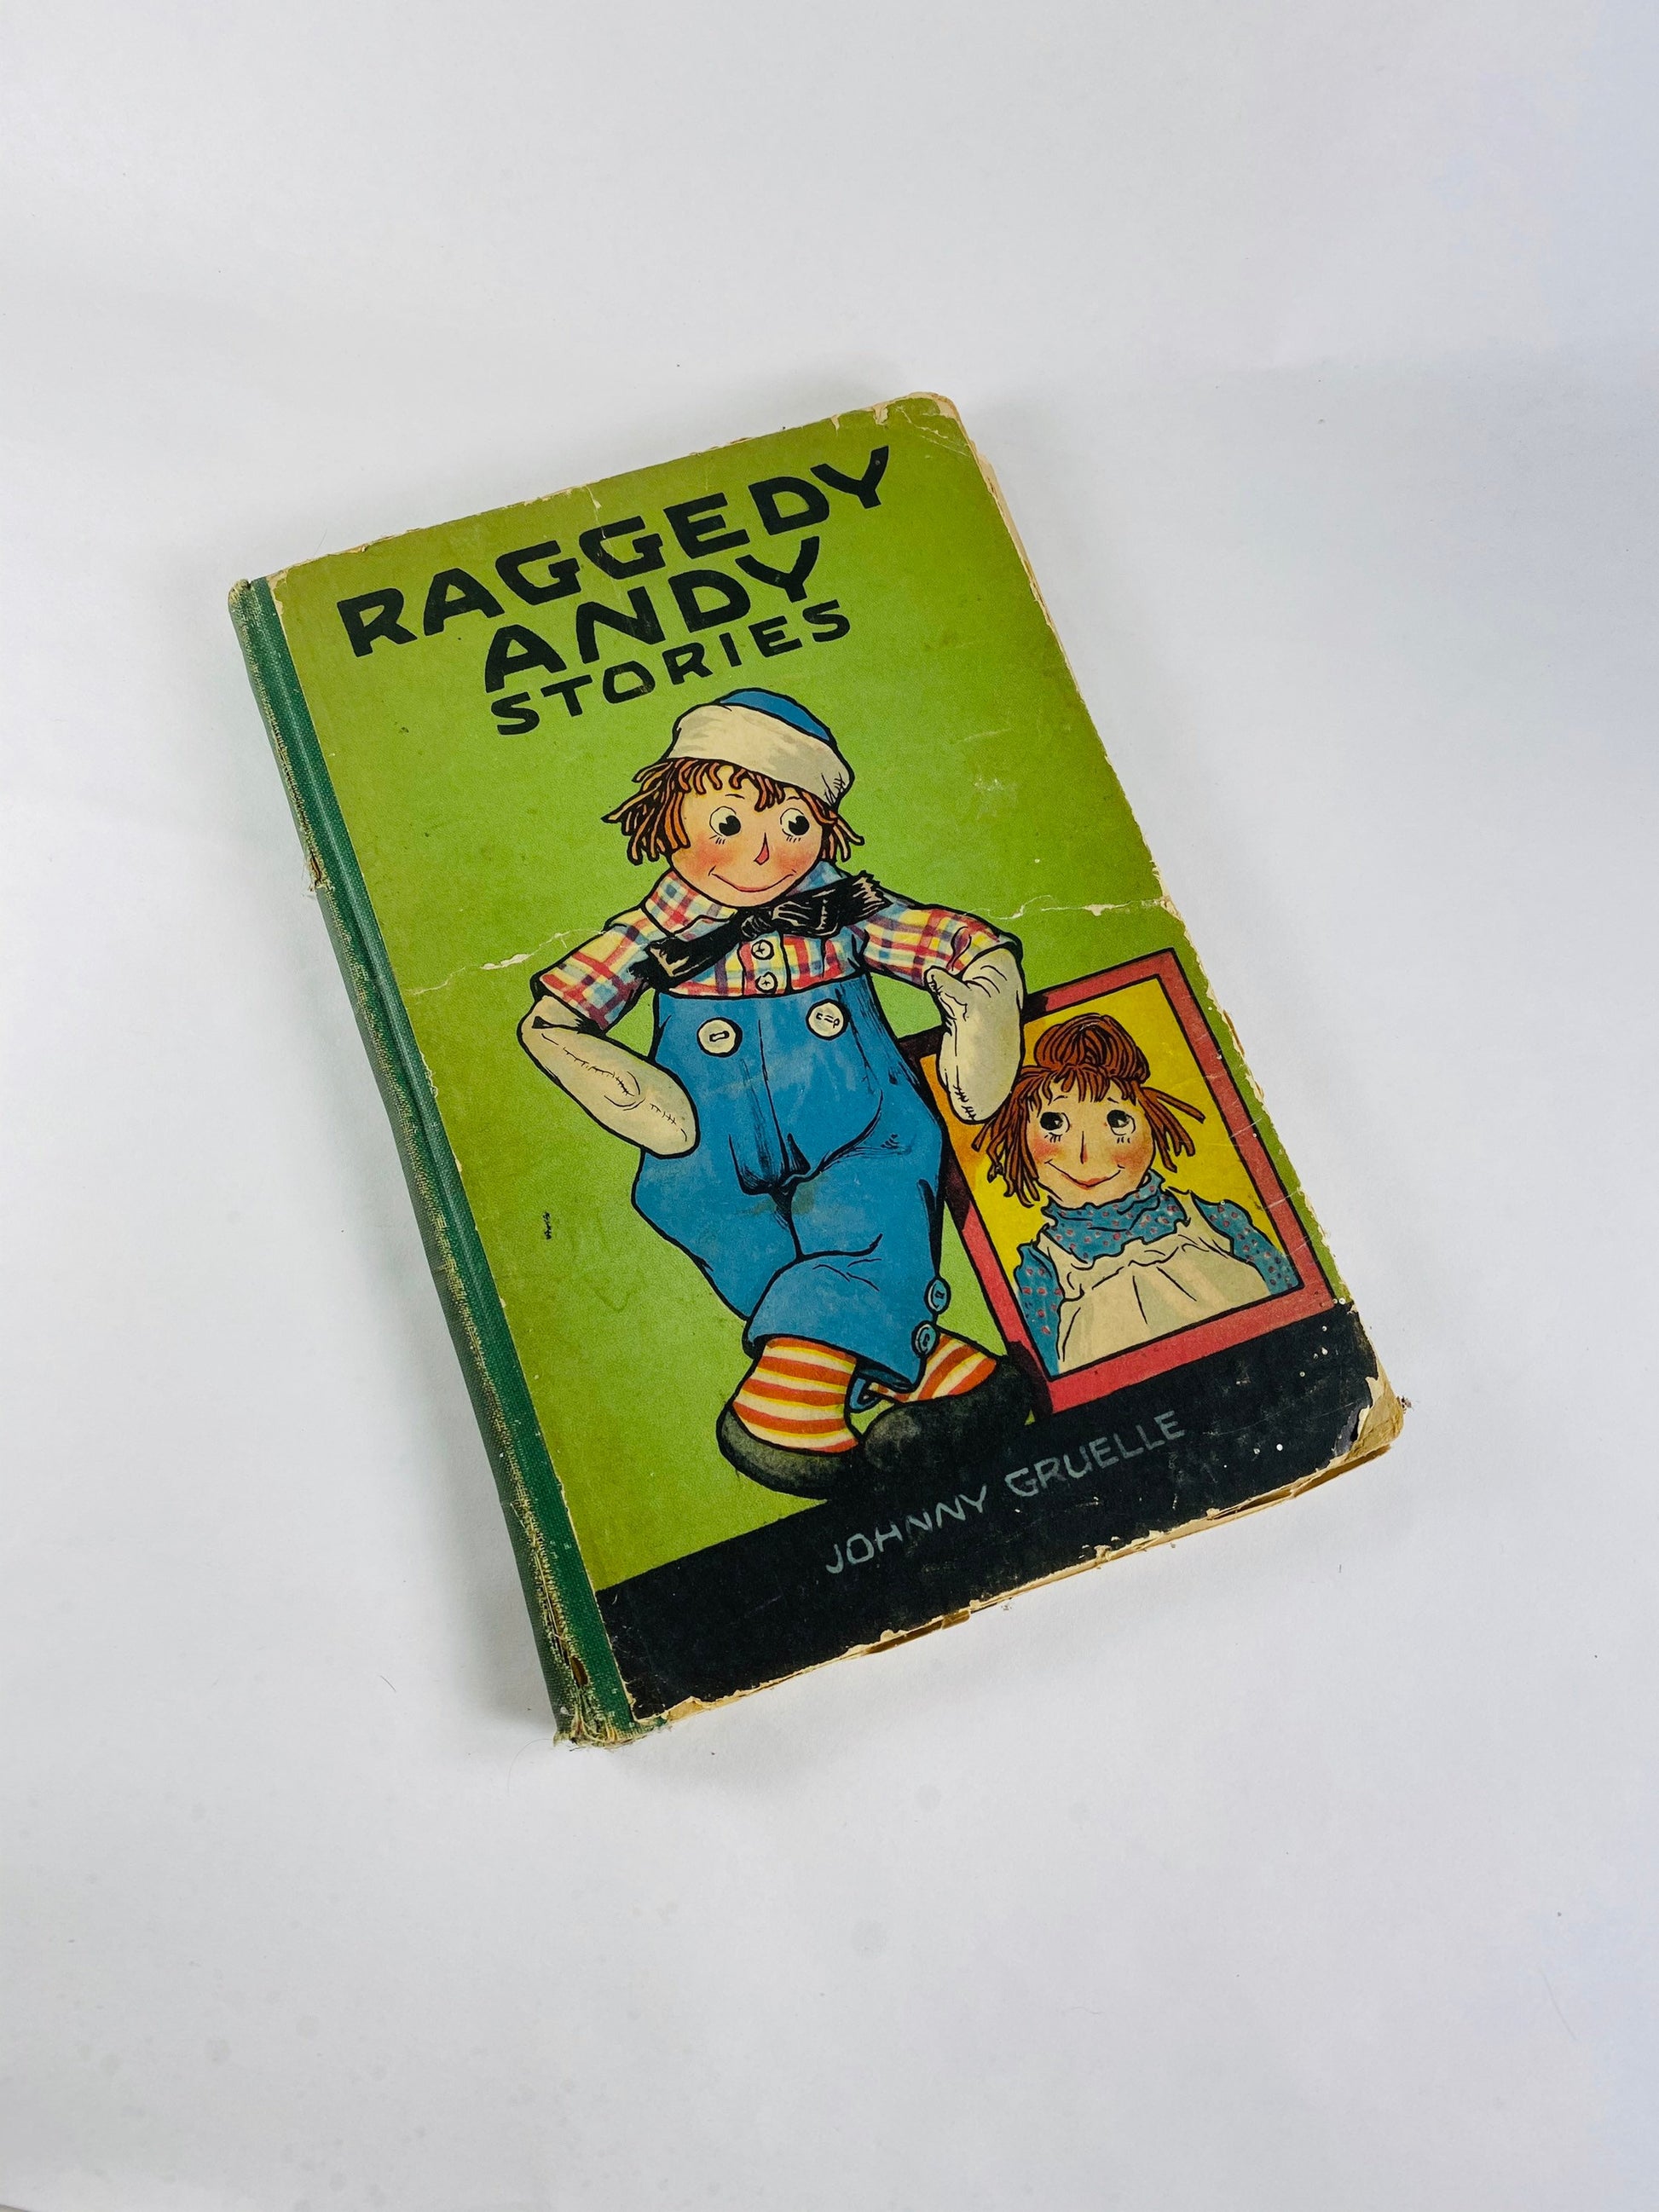 1920 vintage Raggedy Andy Stories book Introducing the Little Rag Brother of Raggedy Ann Volland "Happy Children Books"